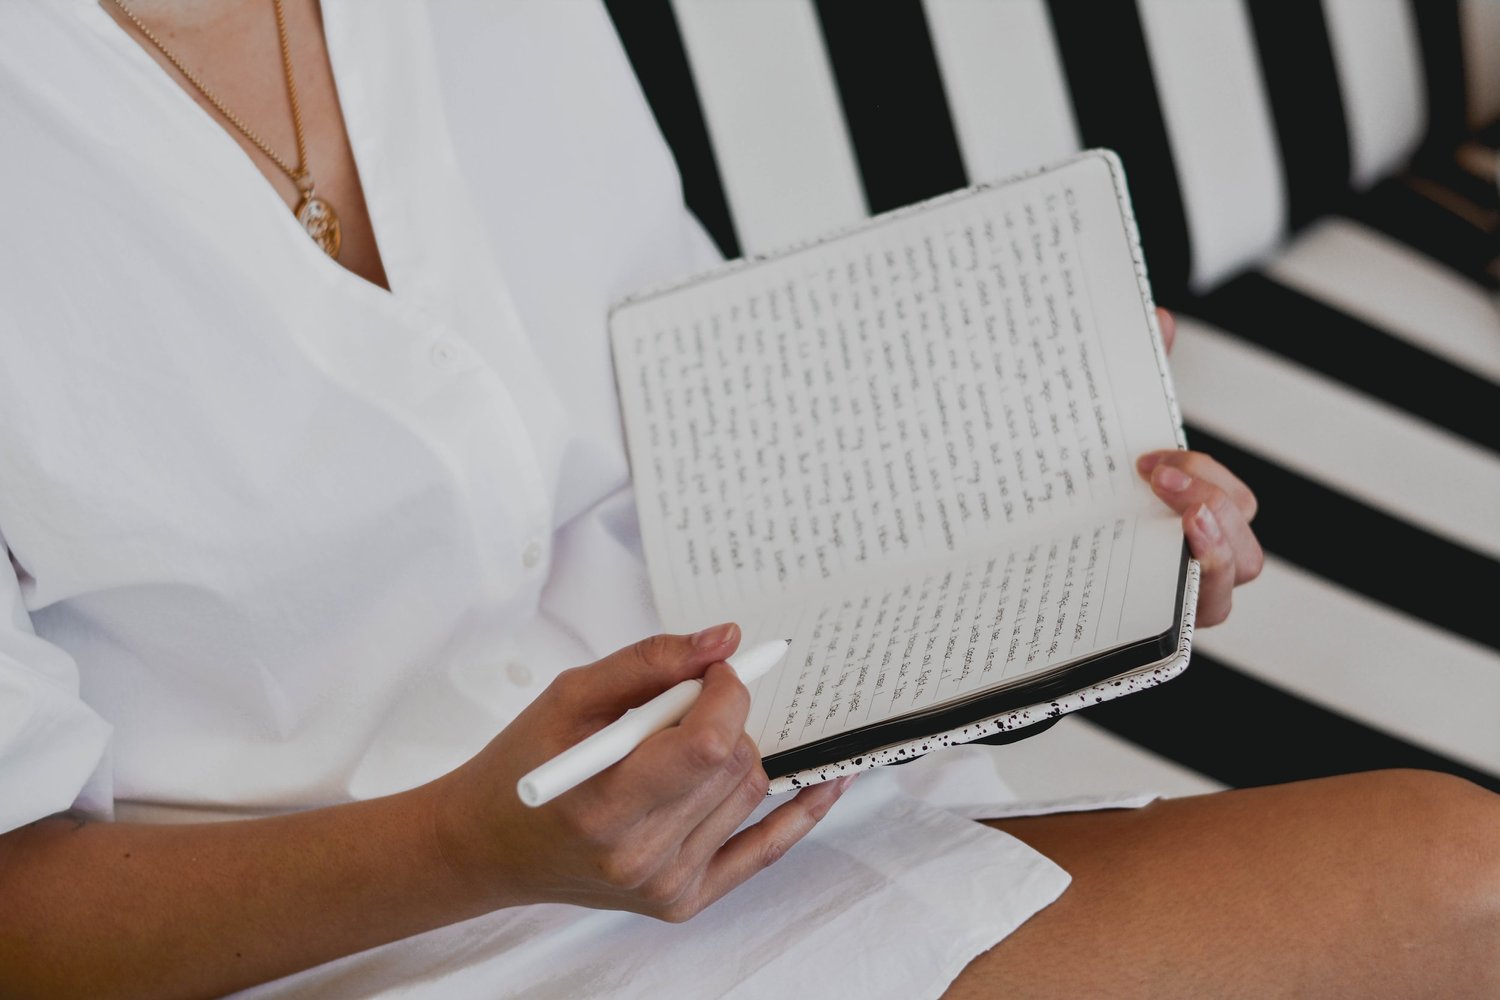 a light brown skinned person is wearing a white dress and a gold necklace. They are seated on a black and white striped couch, holding what a pens to be a journal and a pen in their right hand.